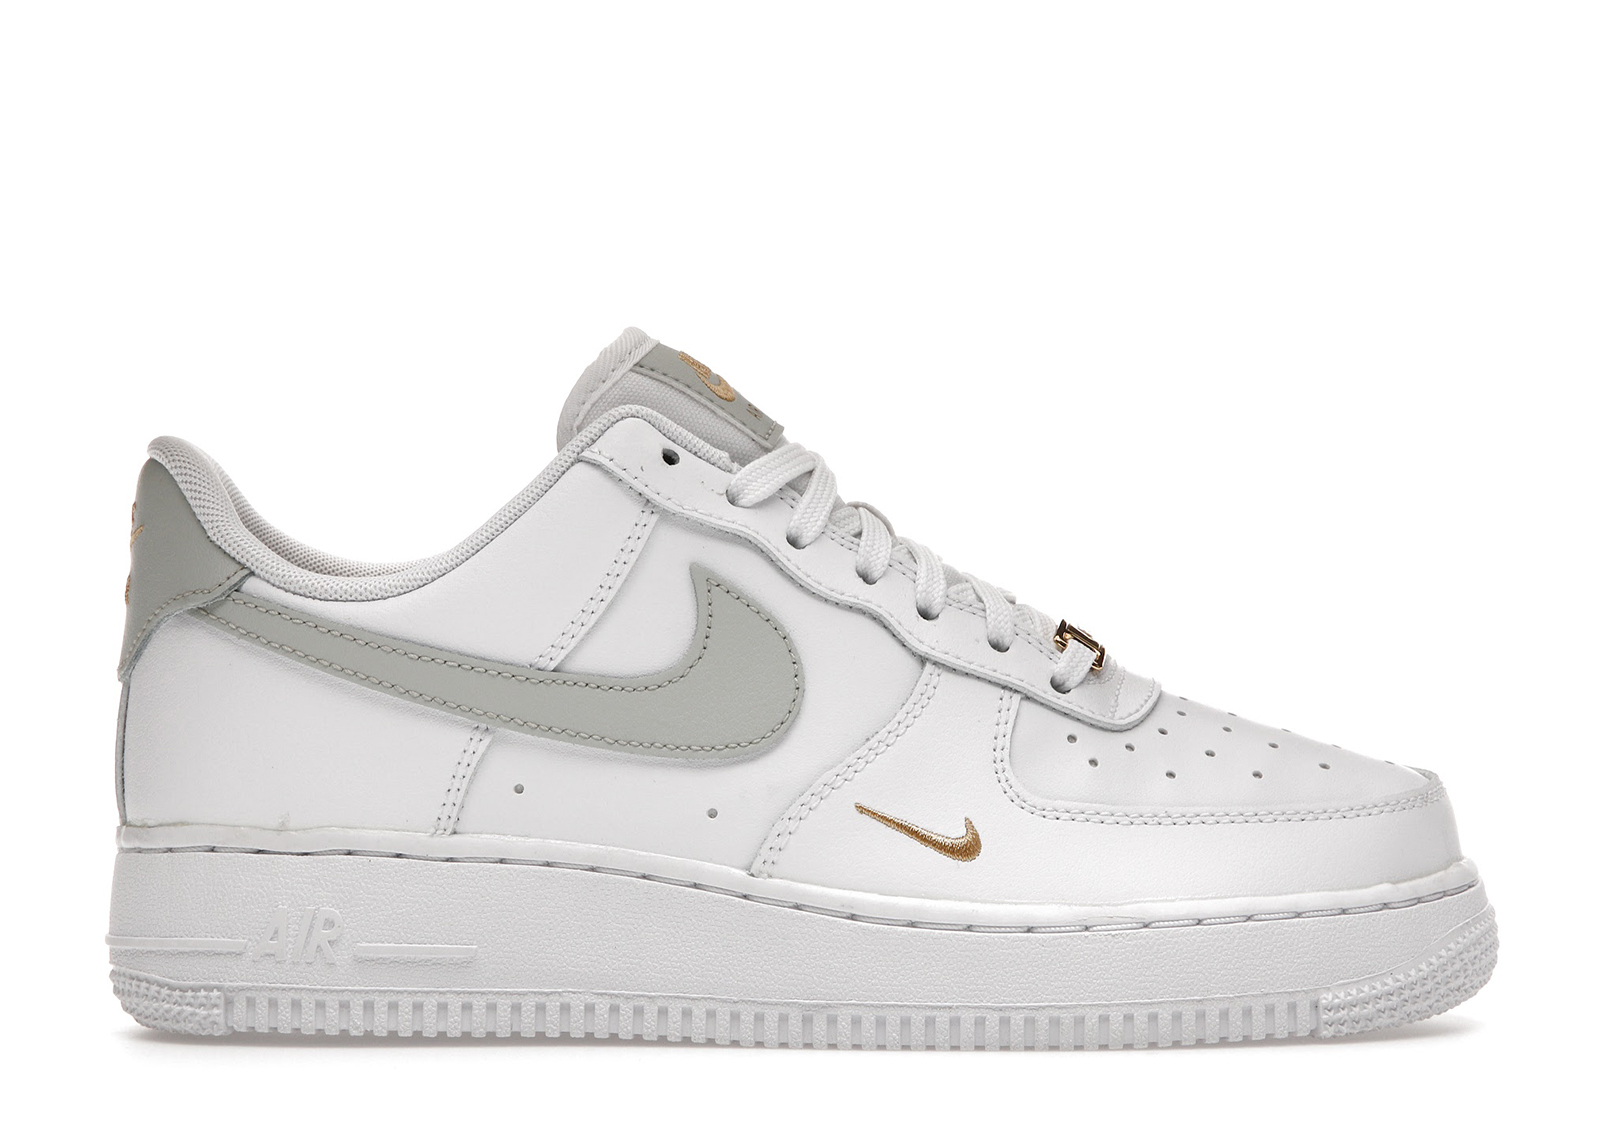 NIKE AIR FORCE 1 LOW 07 WHITE 27.0cm